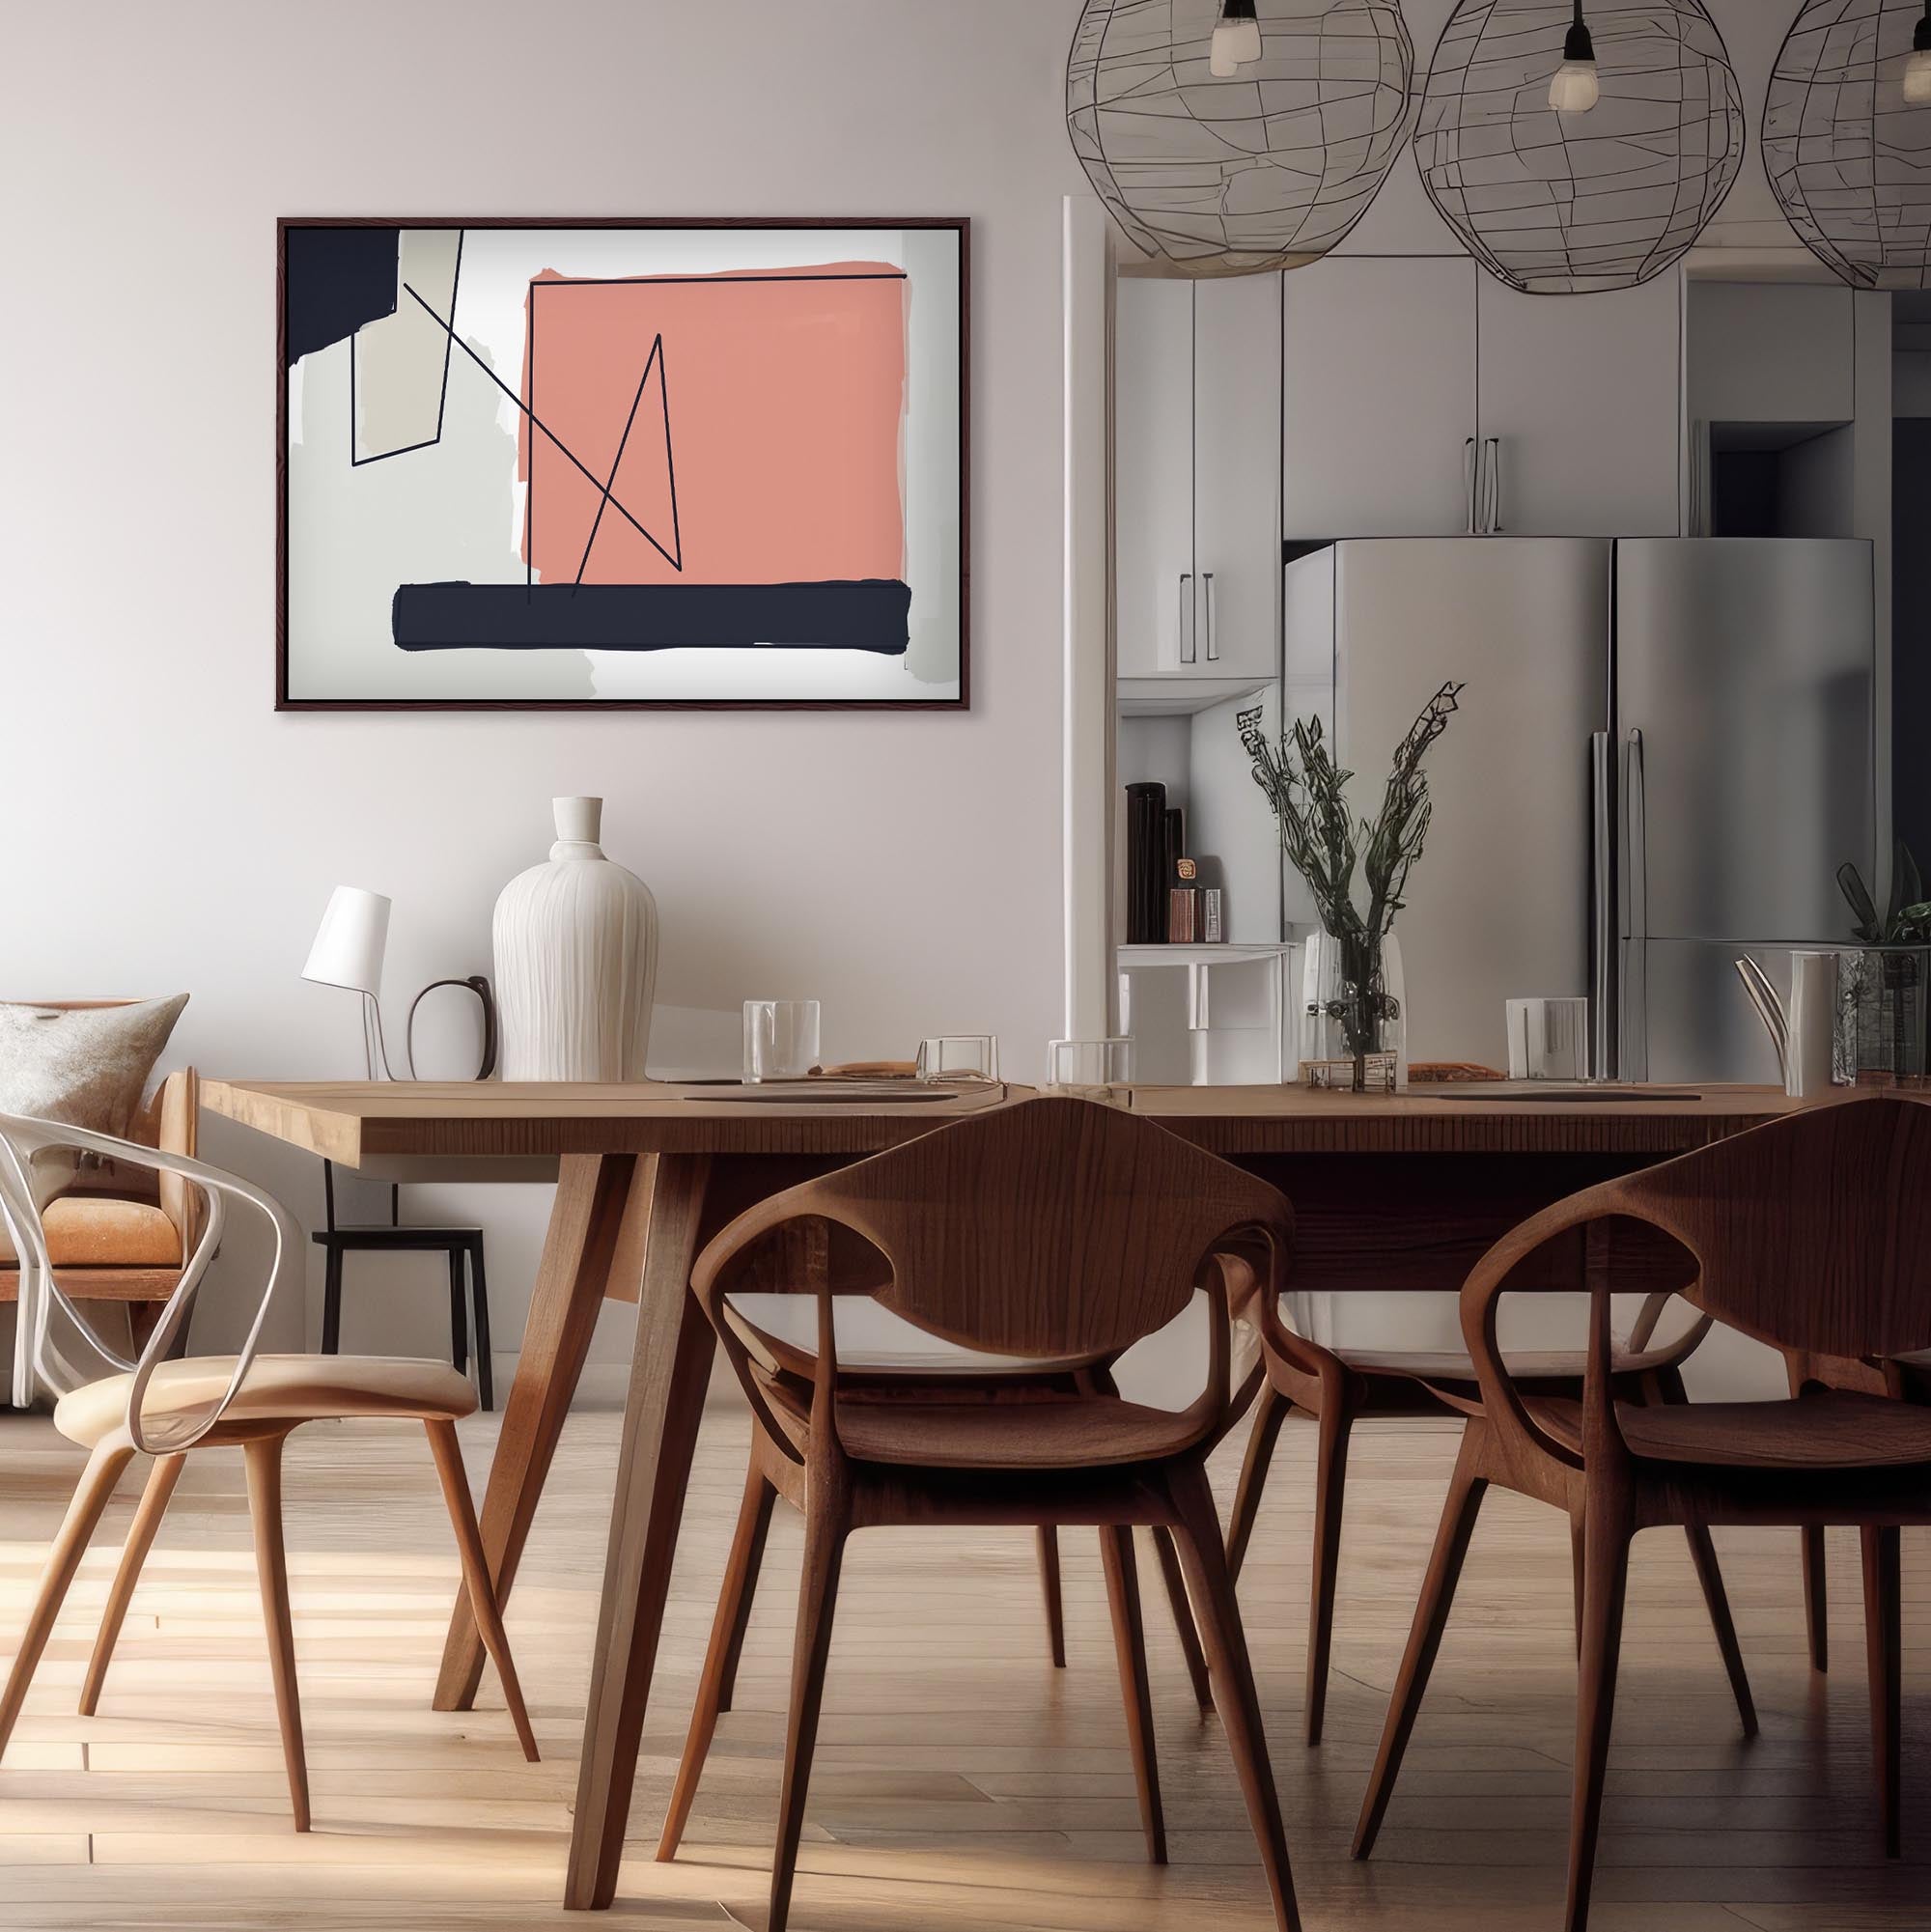 Coral On Grey Shapes Framed Canvas-Abstract House